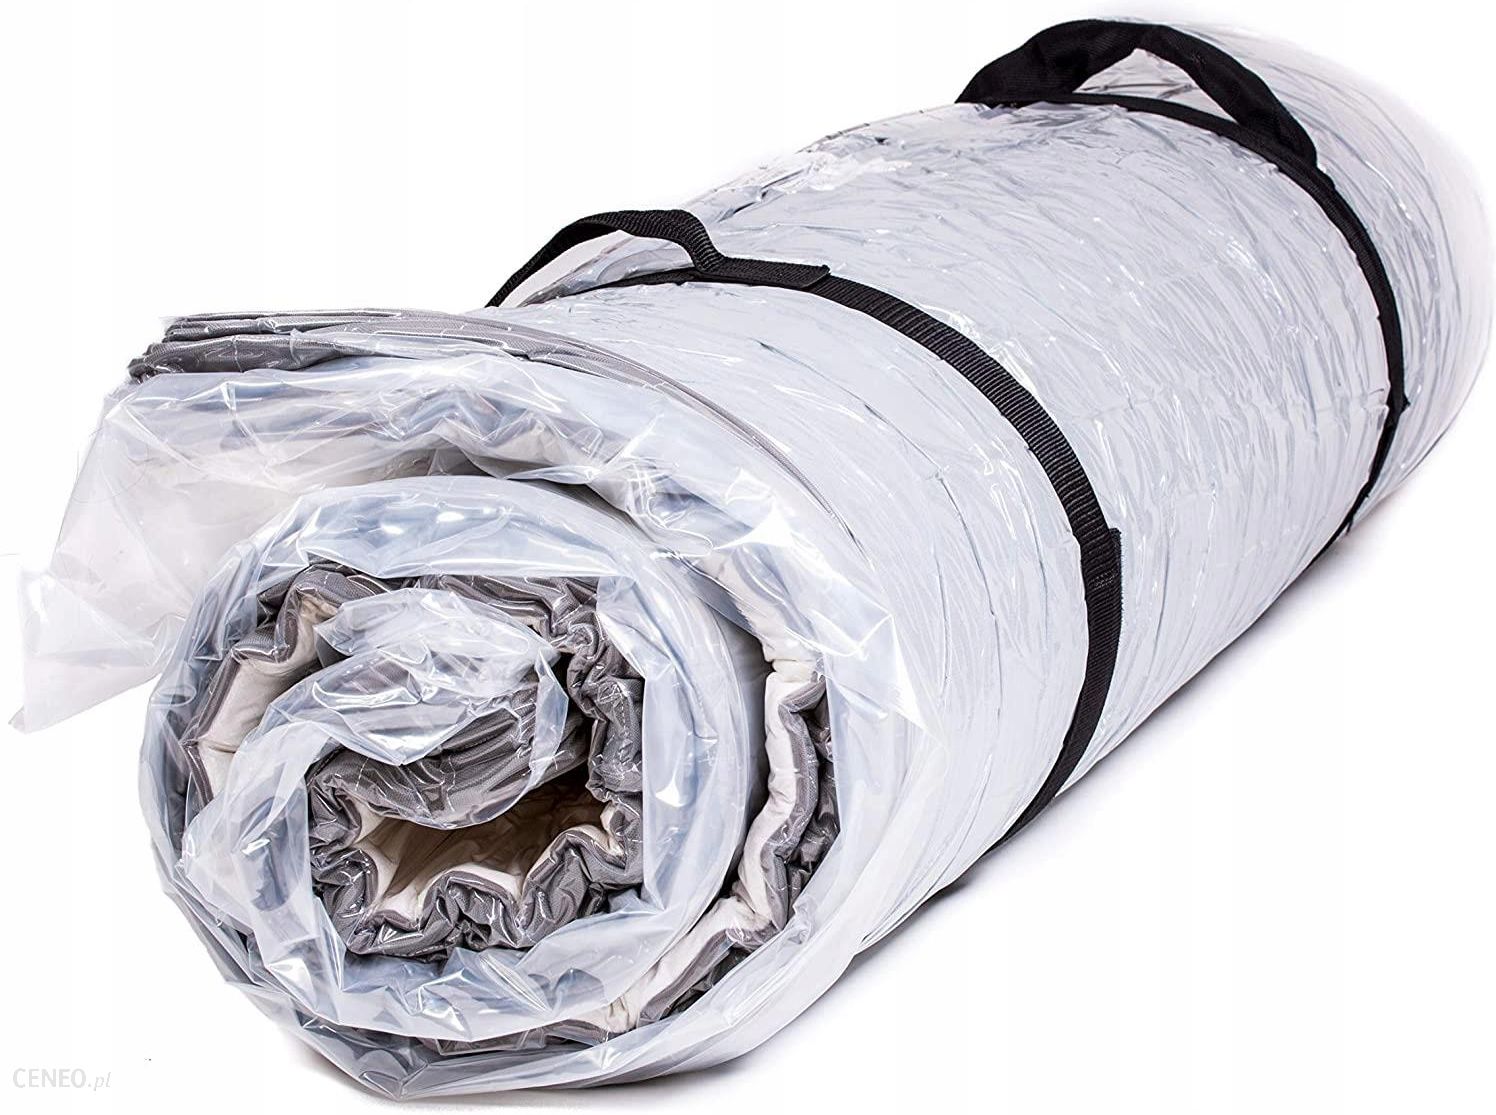 extra large vaccuum bag for bed mattress